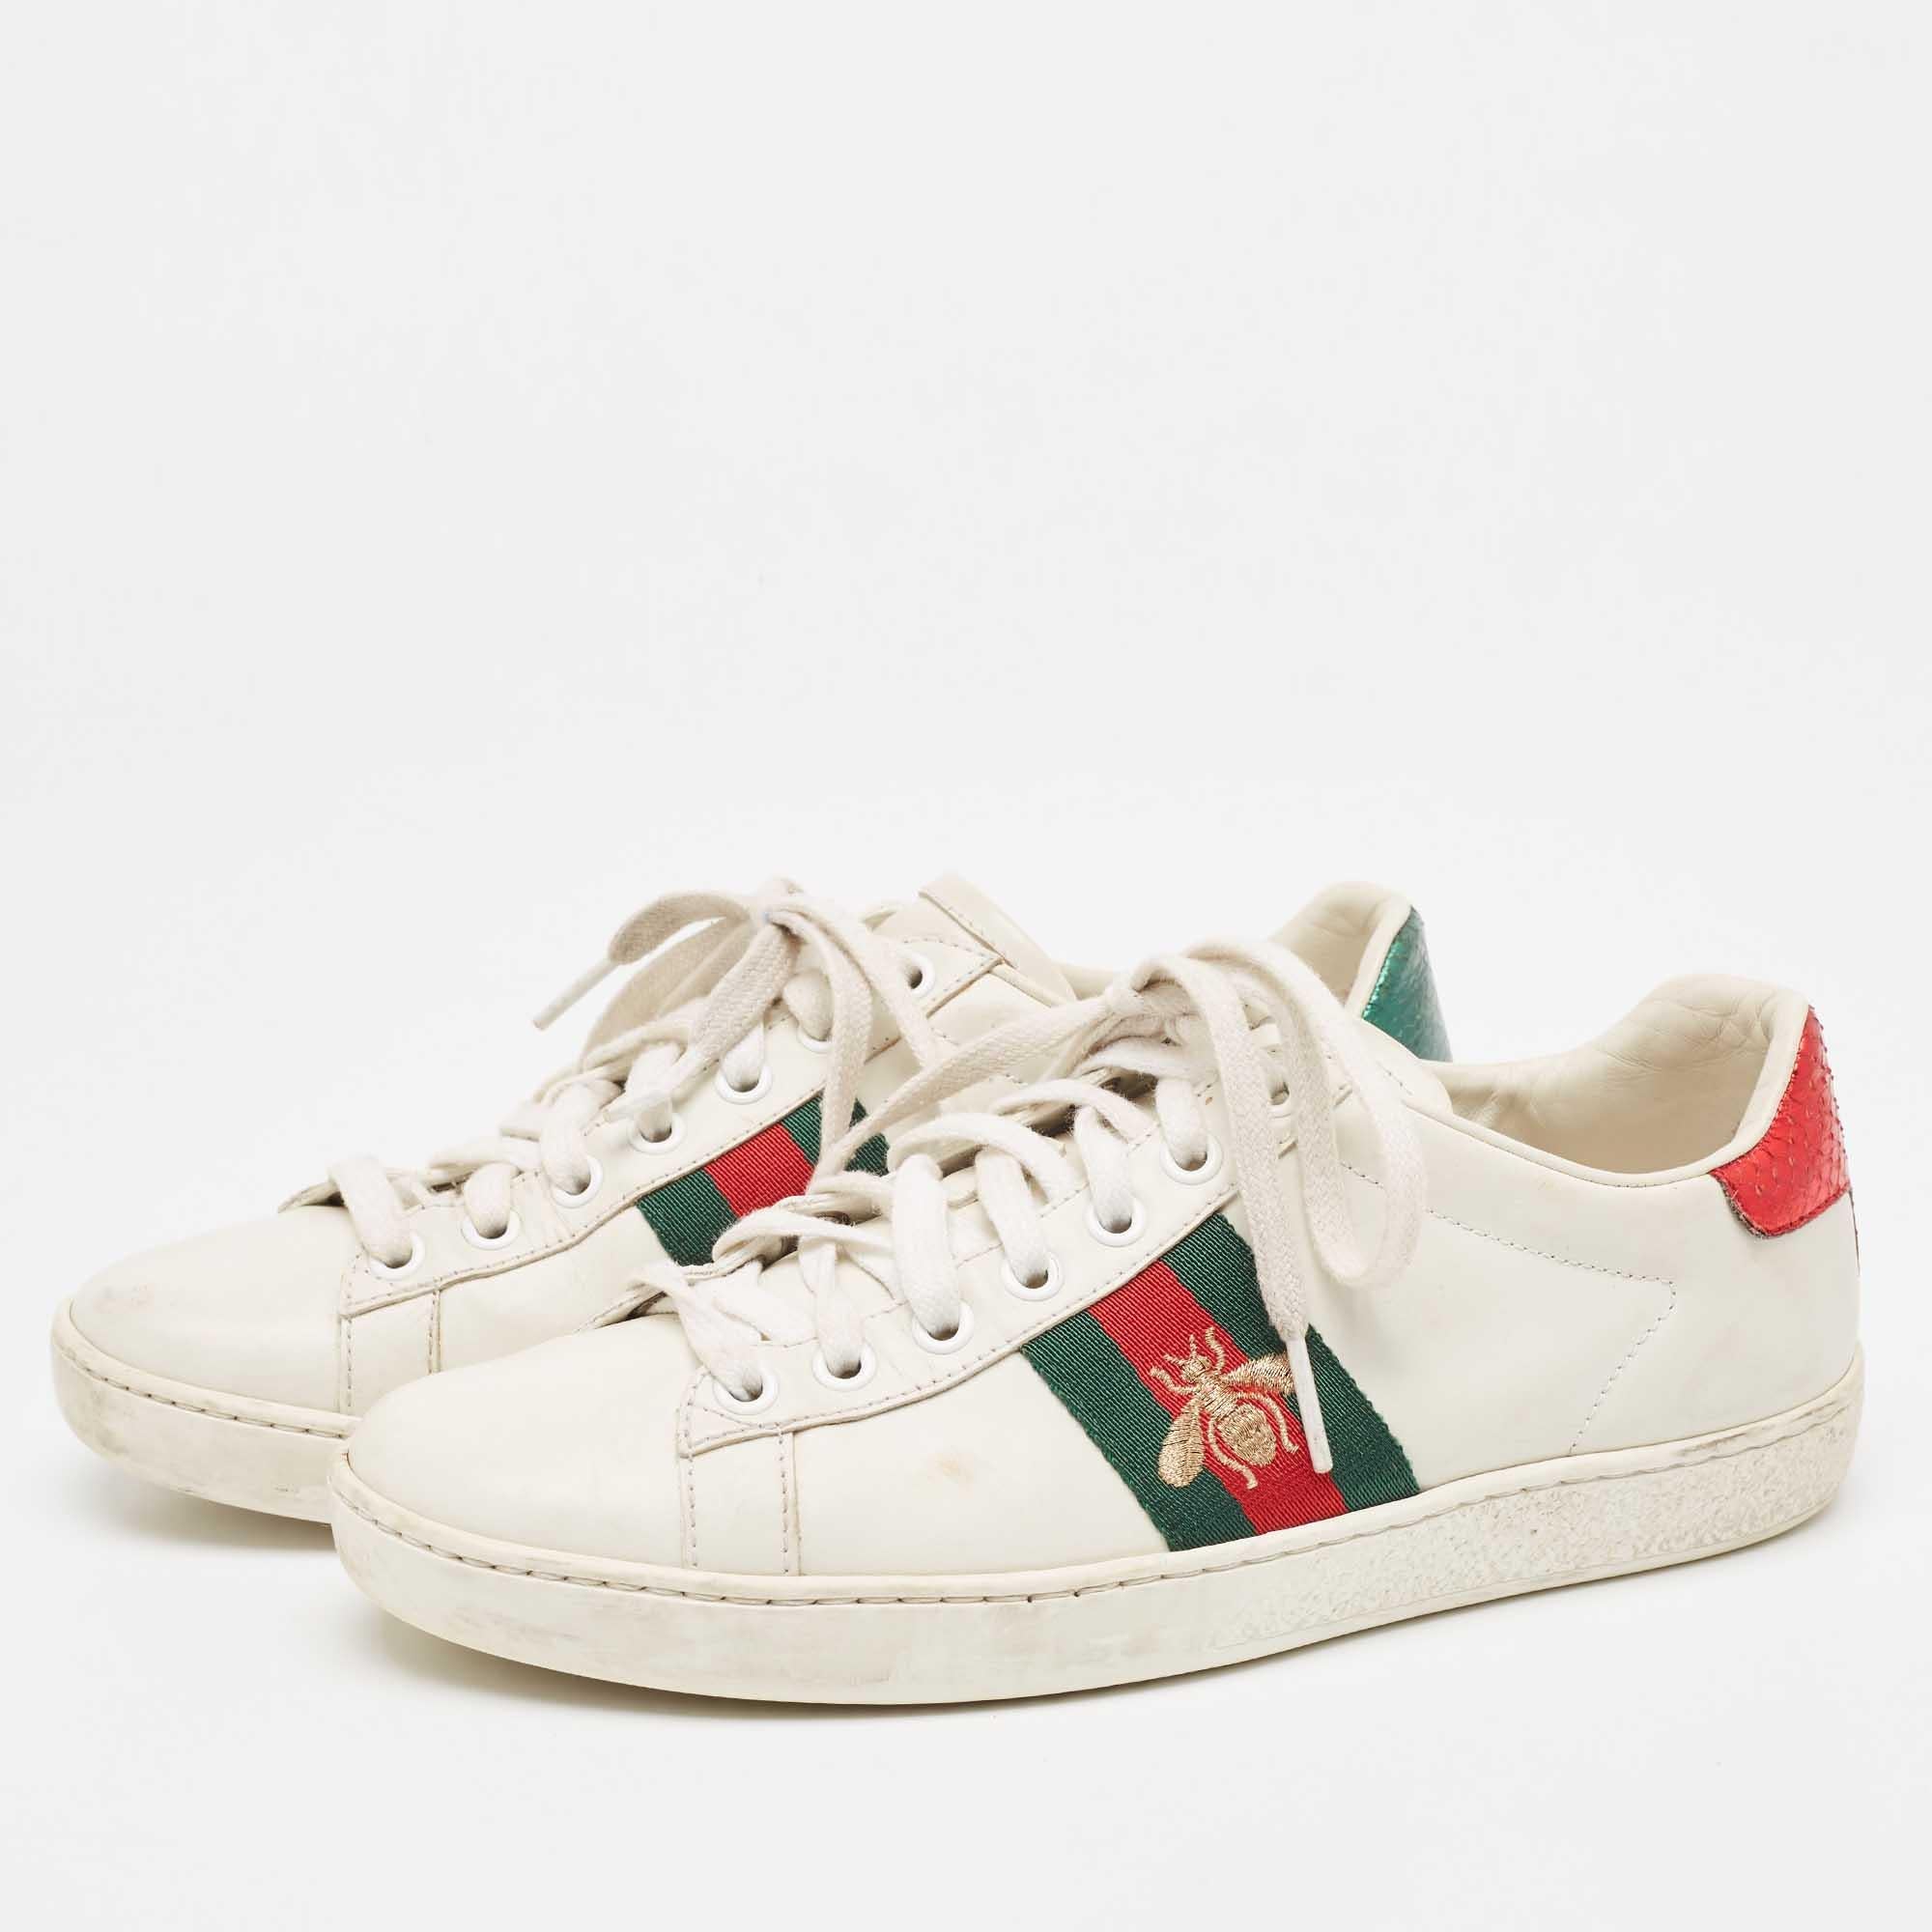 Stacked with signature details, this Gucci pair is rendered from leather on the exterior and these shoes have been fashioned with iconic web stripes along with a bee motif on the sides. Complete with brand detailing on the back, these shoes can be